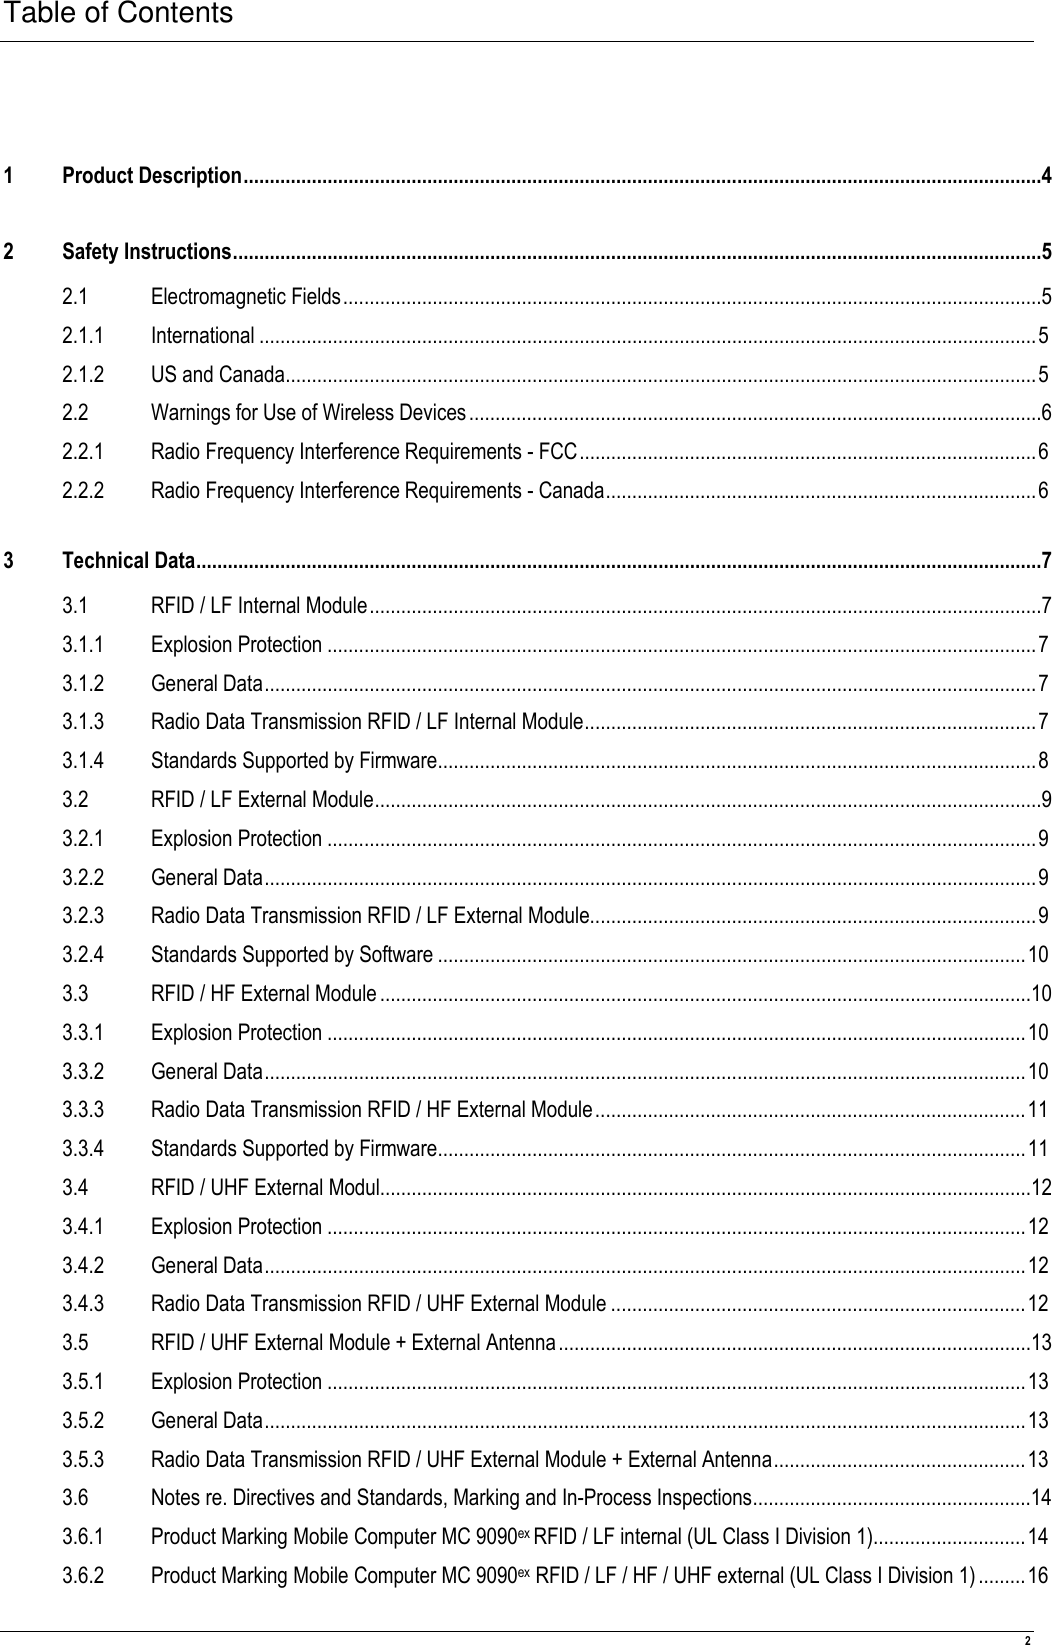 Table of Contents  2  1 Product Description........................................................................................................................................................4 2 Safety Instructions..........................................................................................................................................................5 2.1 Electromagnetic Fields.....................................................................................................................................5 2.1.1 International ....................................................................................................................................................5 2.1.2 US and Canada...............................................................................................................................................5 2.2 Warnings for Use of Wireless Devices.............................................................................................................6 2.2.1 Radio Frequency Interference Requirements - FCC.......................................................................................6 2.2.2 Radio Frequency Interference Requirements - Canada..................................................................................6 3 Technical Data.................................................................................................................................................................7 3.1 RFID / LF Internal Module................................................................................................................................7 3.1.1 Explosion Protection .......................................................................................................................................7 3.1.2 General Data...................................................................................................................................................7 3.1.3 Radio Data Transmission RFID / LF Internal Module......................................................................................7 3.1.4 Standards Supported by Firmware..................................................................................................................8 3.2 RFID / LF External Module...............................................................................................................................9 3.2.1 Explosion Protection .......................................................................................................................................9 3.2.2 General Data...................................................................................................................................................9 3.2.3 Radio Data Transmission RFID / LF External Module.....................................................................................9 3.2.4 Standards Supported by Software ................................................................................................................10 3.3 RFID / HF External Module............................................................................................................................10 3.3.1 Explosion Protection .....................................................................................................................................10 3.3.2 General Data.................................................................................................................................................10 3.3.3 Radio Data Transmission RFID / HF External Module..................................................................................11 3.3.4 Standards Supported by Firmware................................................................................................................11 3.4 RFID / UHF External Modul............................................................................................................................12 3.4.1 Explosion Protection .....................................................................................................................................12 3.4.2 General Data.................................................................................................................................................12 3.4.3 Radio Data Transmission RFID / UHF External Module ...............................................................................12 3.5 RFID / UHF External Module + External Antenna..........................................................................................13 3.5.1 Explosion Protection .....................................................................................................................................13 3.5.2 General Data.................................................................................................................................................13 3.5.3 Radio Data Transmission RFID / UHF External Module + External Antenna................................................13 3.6 Notes re. Directives and Standards, Marking and In-Process Inspections.....................................................14 3.6.1 Product Marking Mobile Computer MC 9090ex RFID / LF internal (UL Class I Division 1).............................14 3.6.2 Product Marking Mobile Computer MC 9090ex RFID / LF / HF / UHF external (UL Class I Division 1).........16 